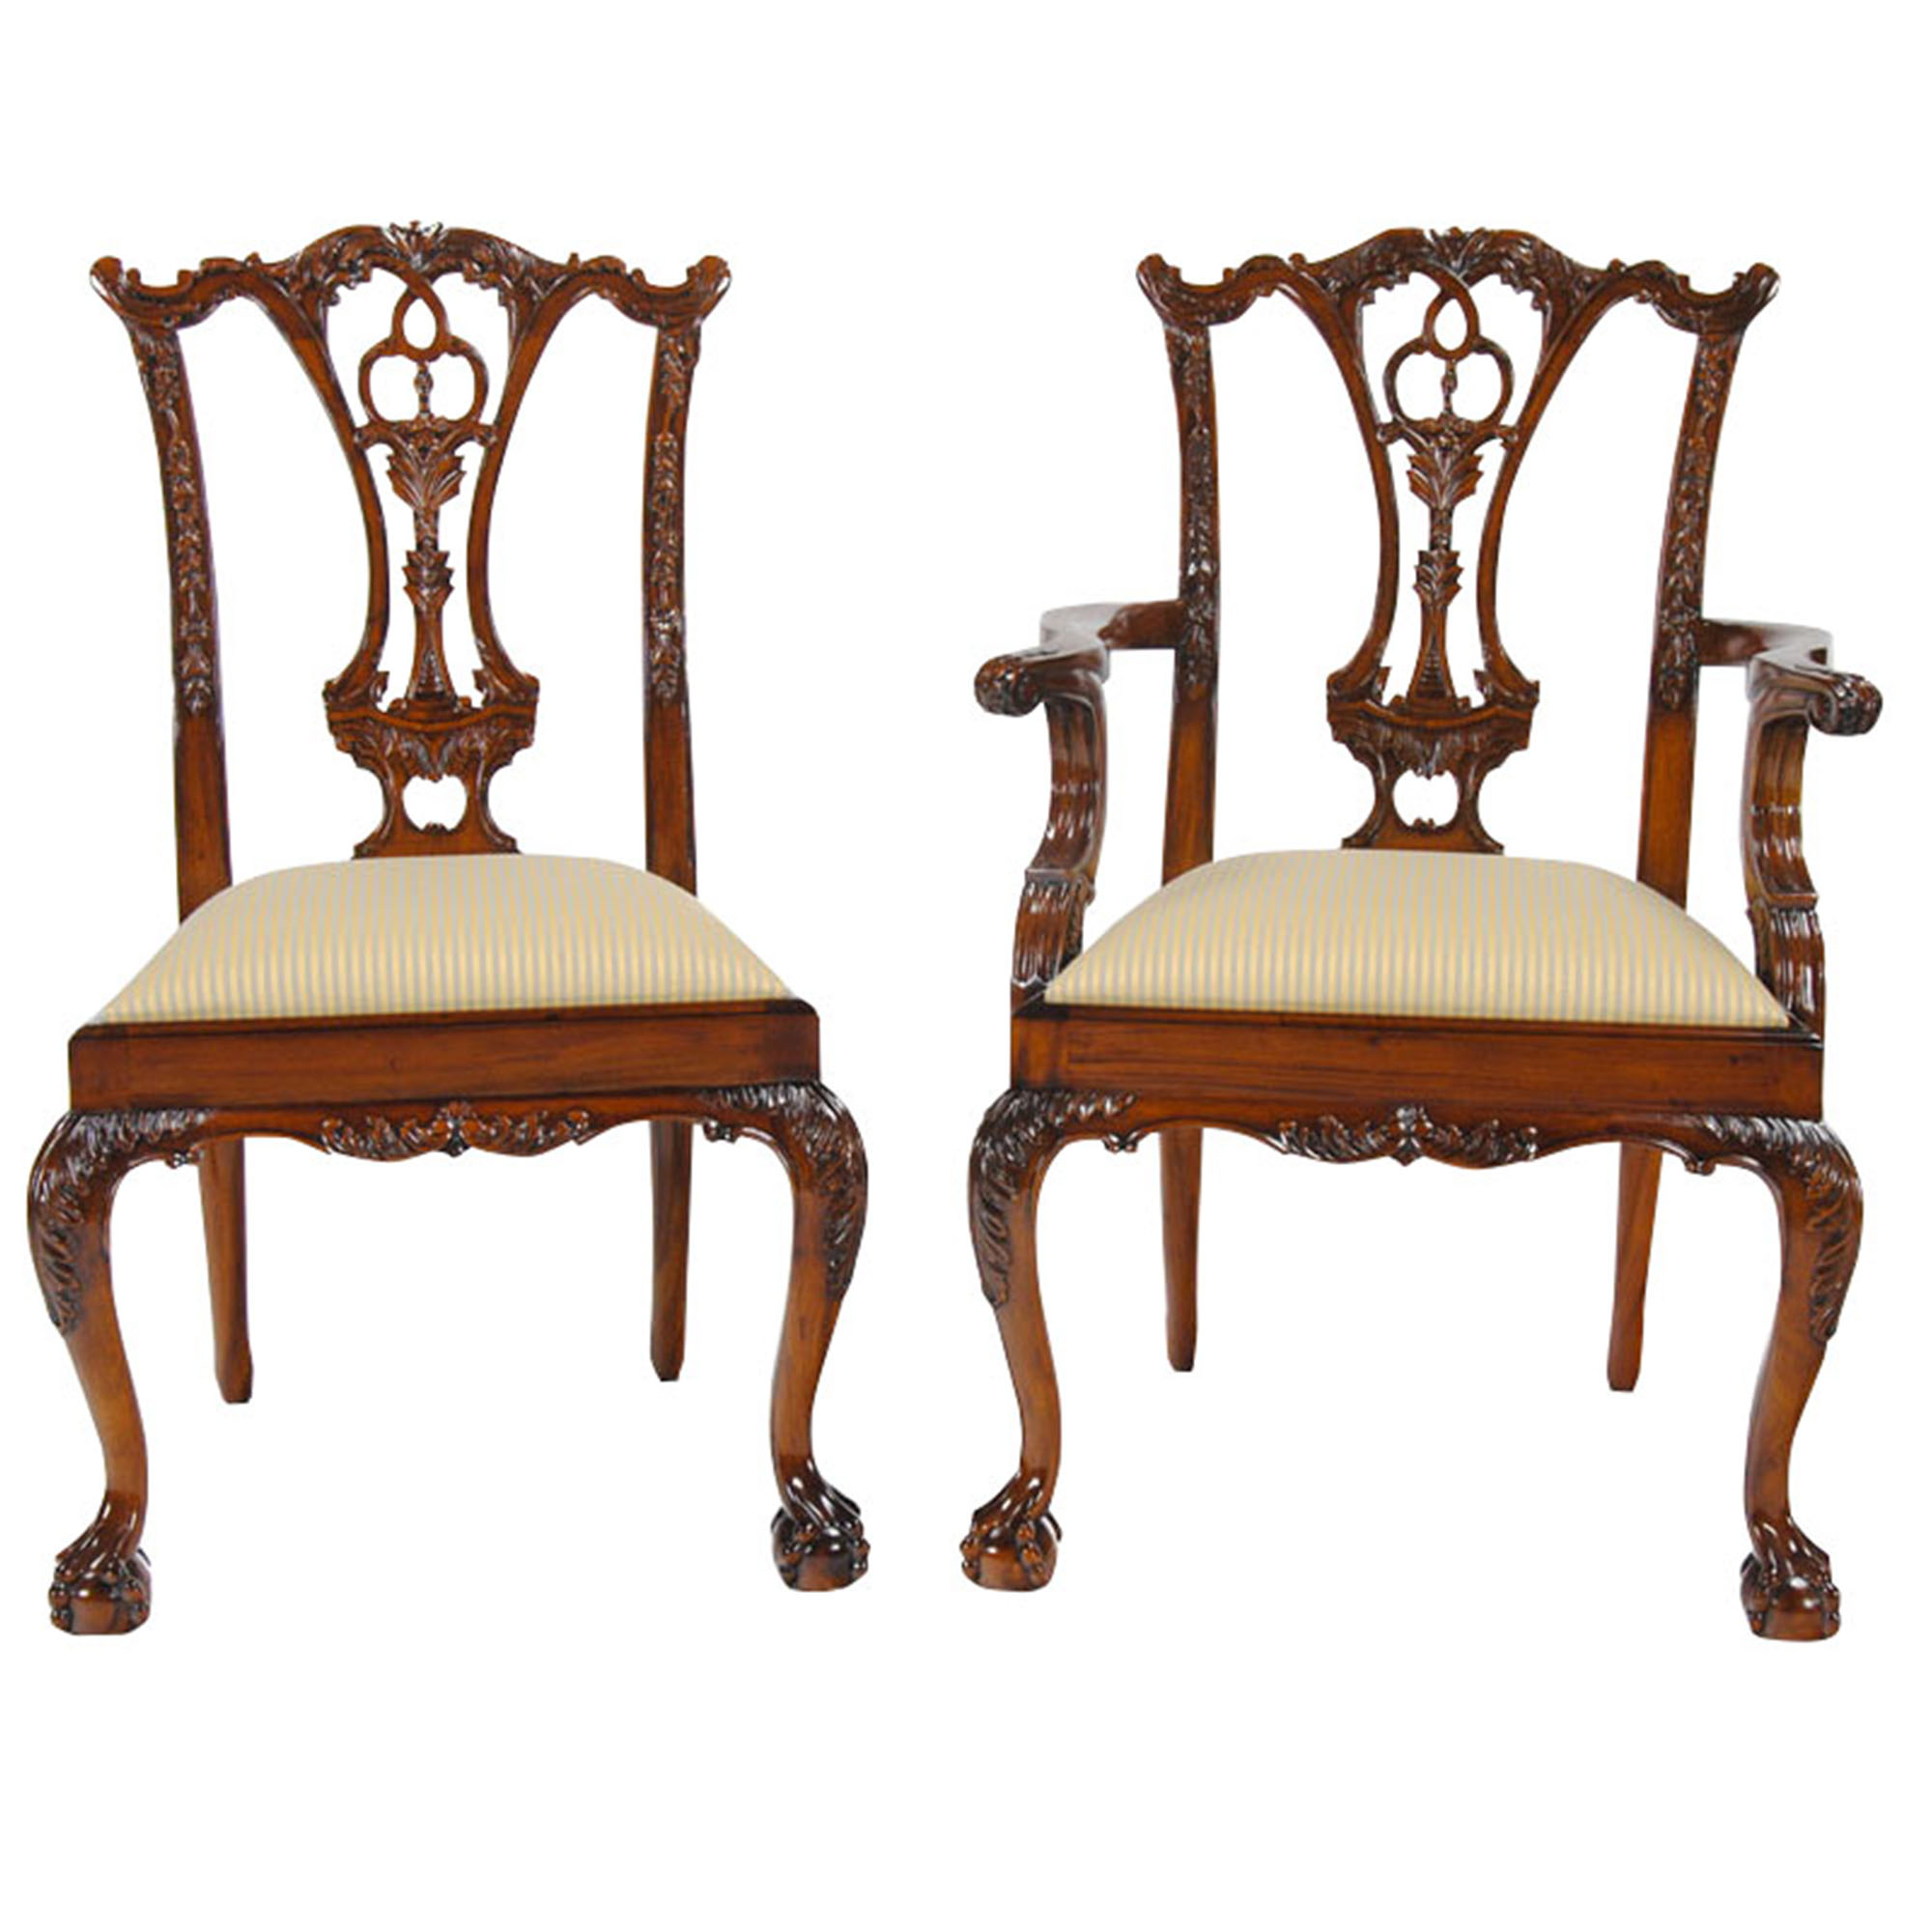 Standard Chippendale Chairs